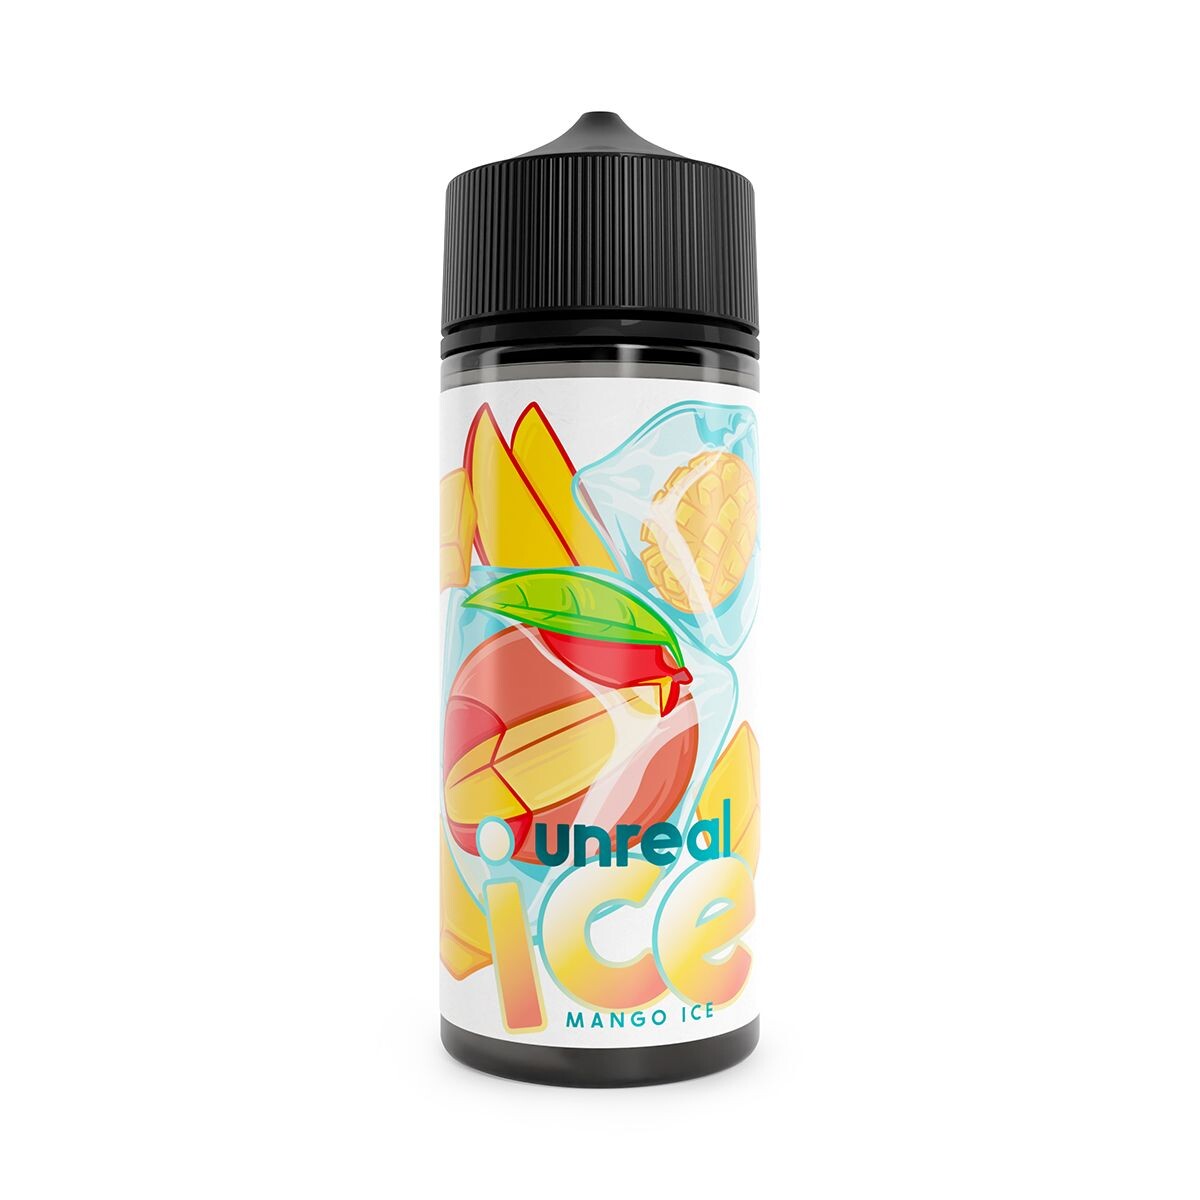 Unreal Ice Mango Ice Shortfill, A Super Fresh Flavour Available At Dispergo Vaping UK